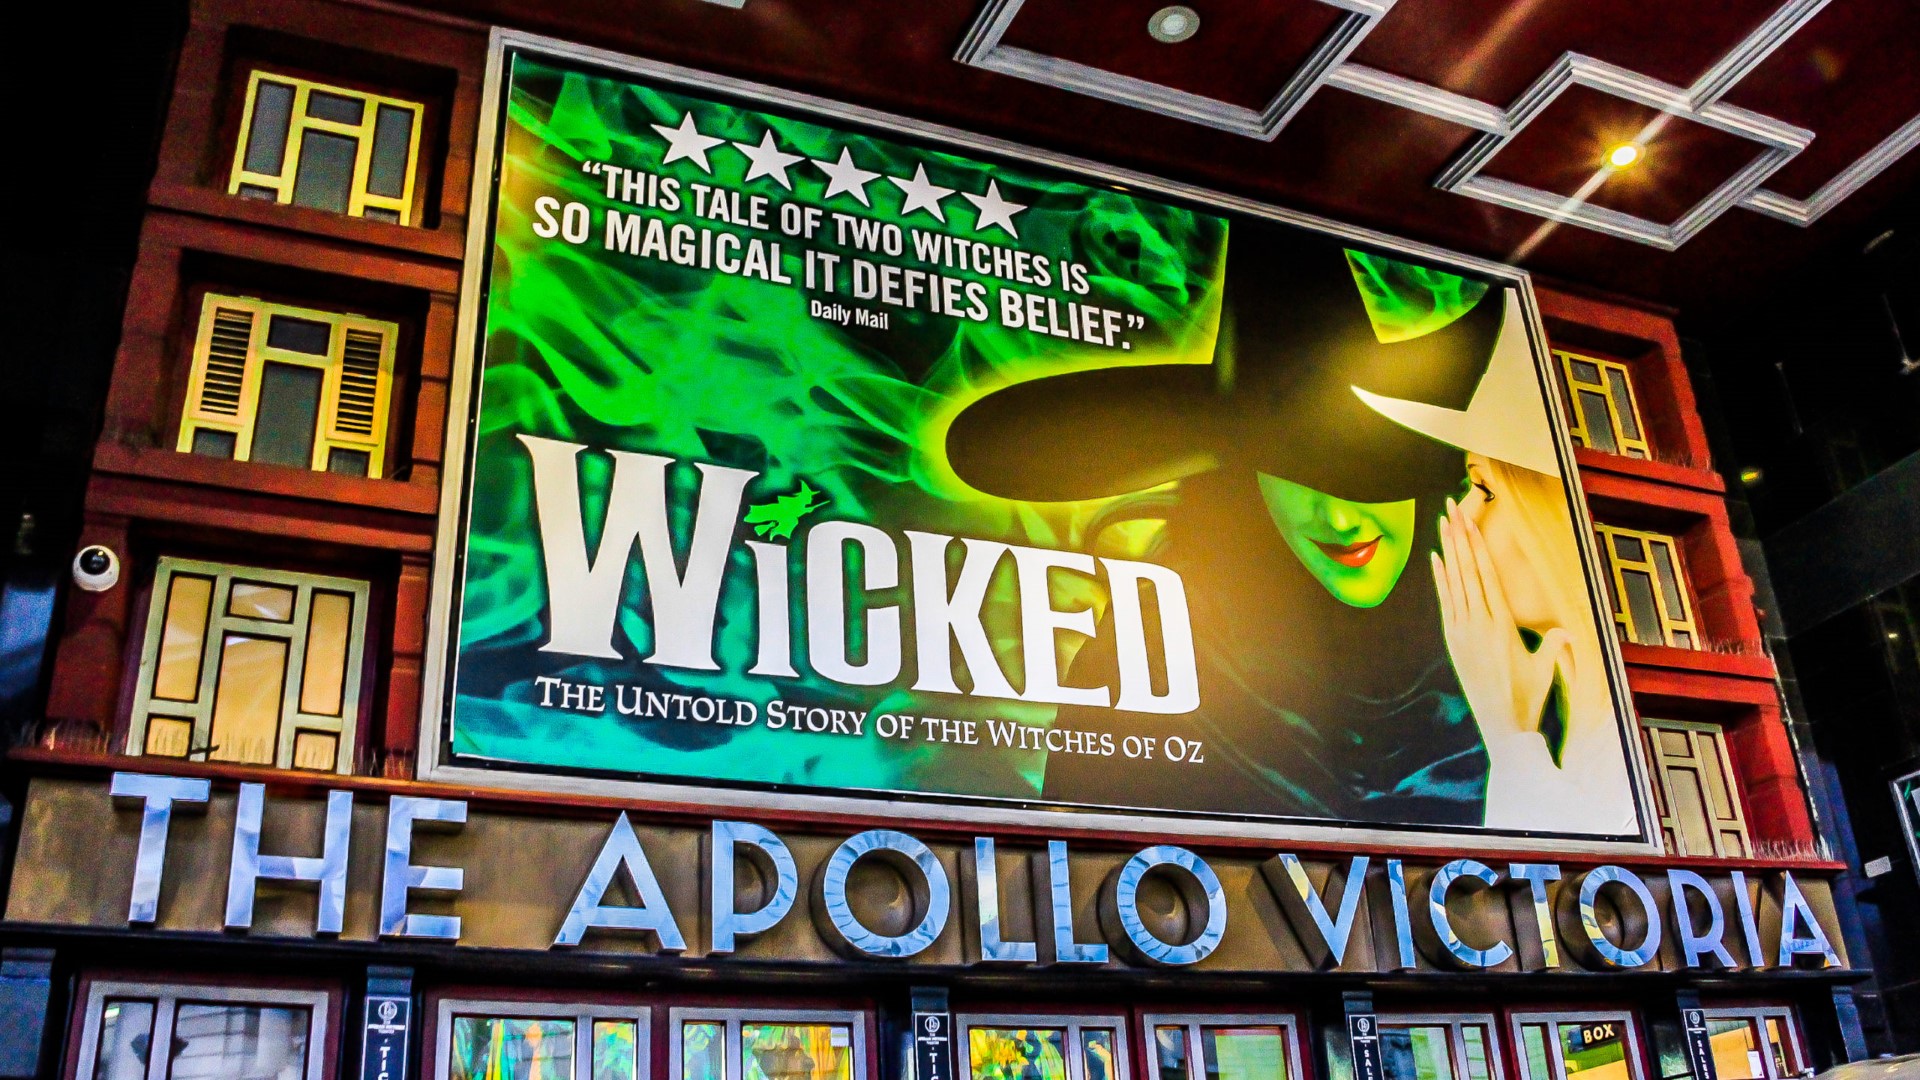 The Apollo Victoria Theatre displaying signage for the show Wicked.